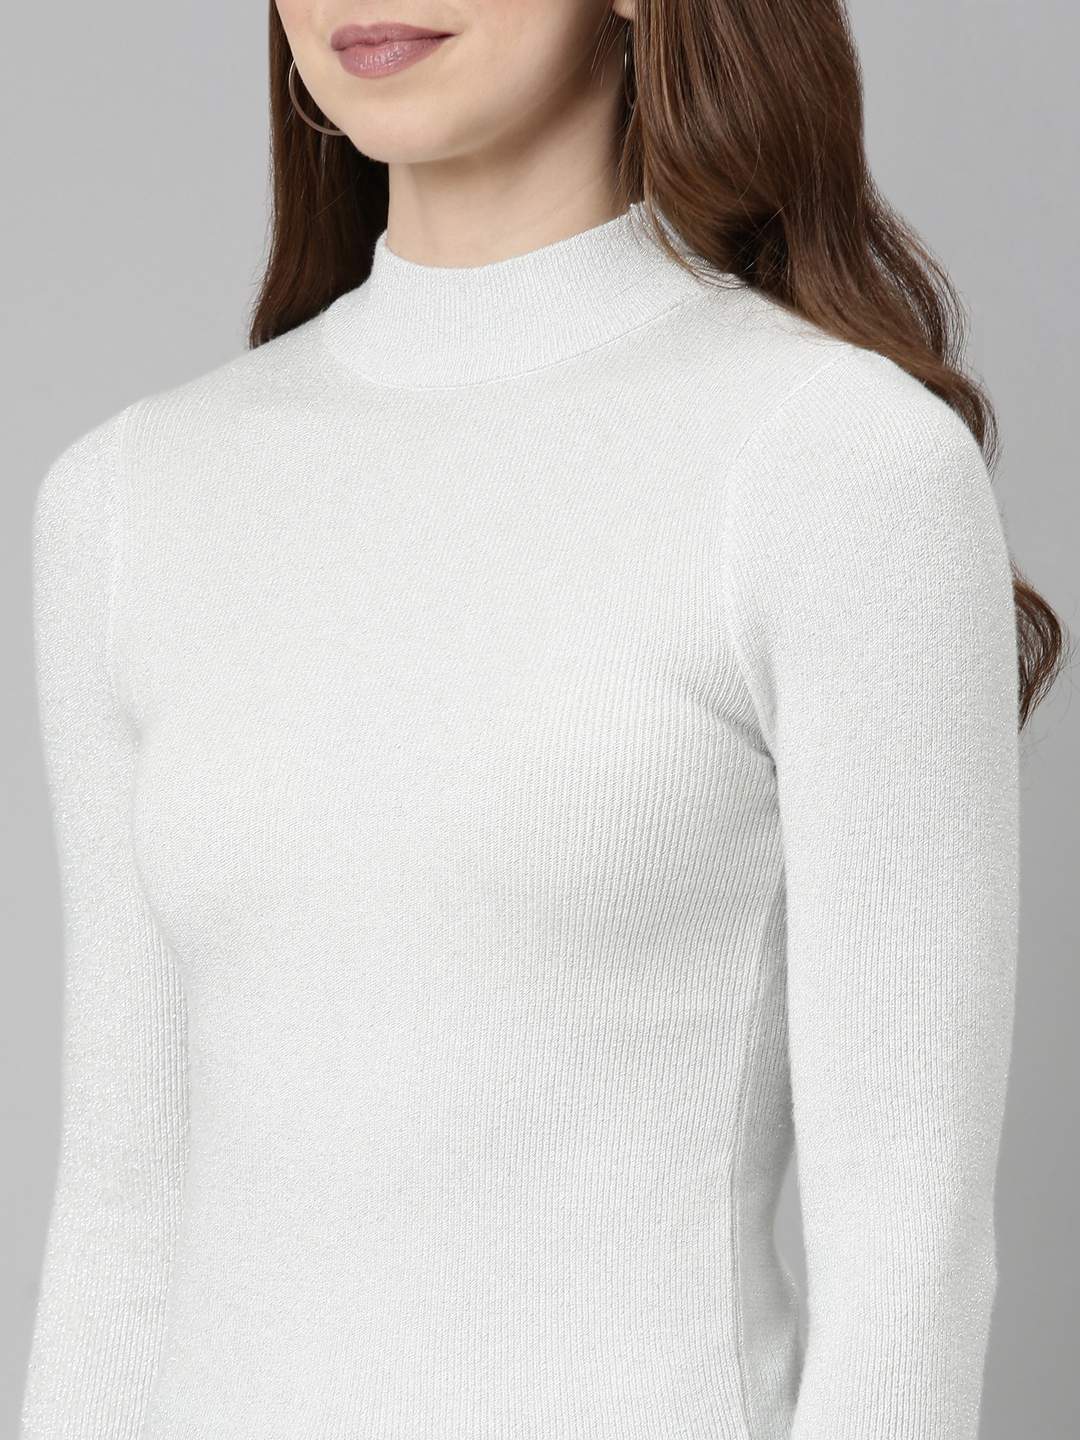 Showoff | SHOWOFF Women's High Neck Embellished Regular Sleeves Fitted White Top 7